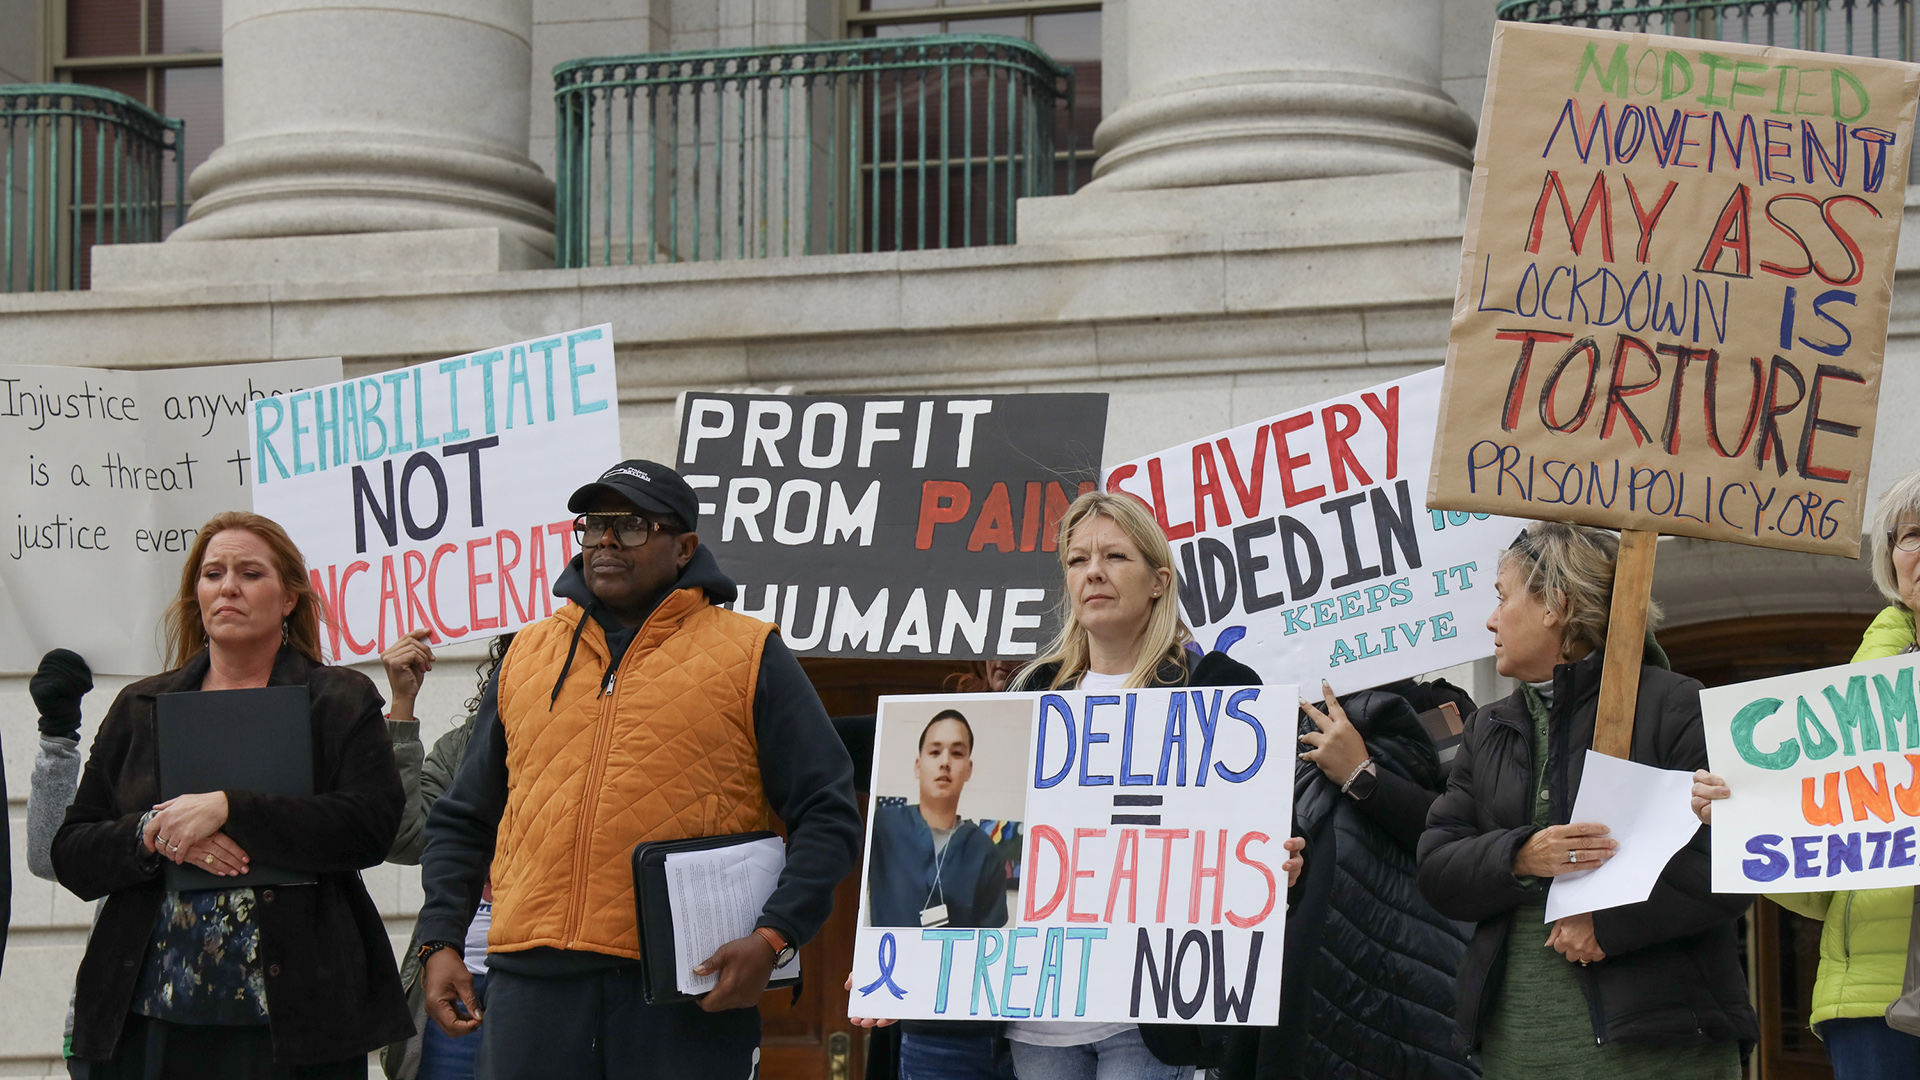 People stand in front of a building with marble masonry and pillars and hold signs that read "Rehabilitate Not Incarcerate," "Profit From Pain Inhumane," "Delays = Deaths Treat Now," and other phrases.